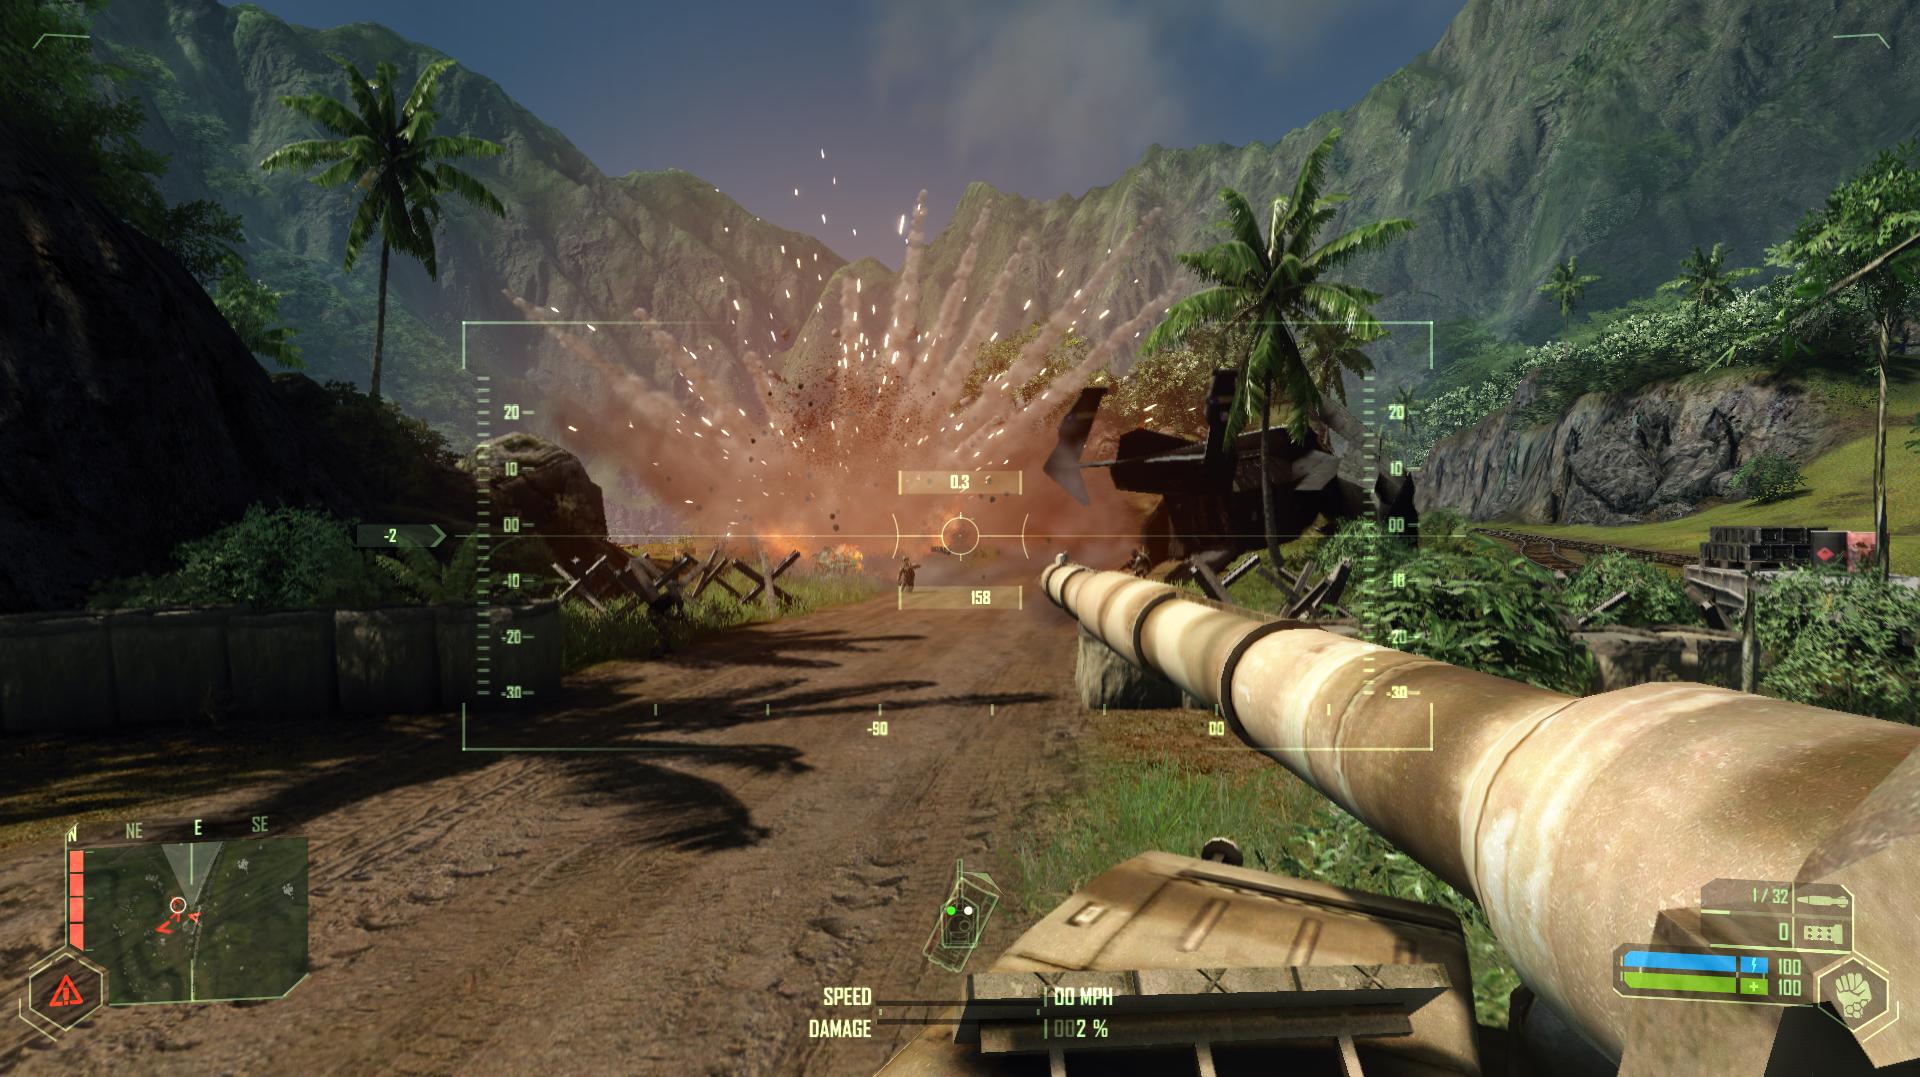 Crisis screenshots from the original release